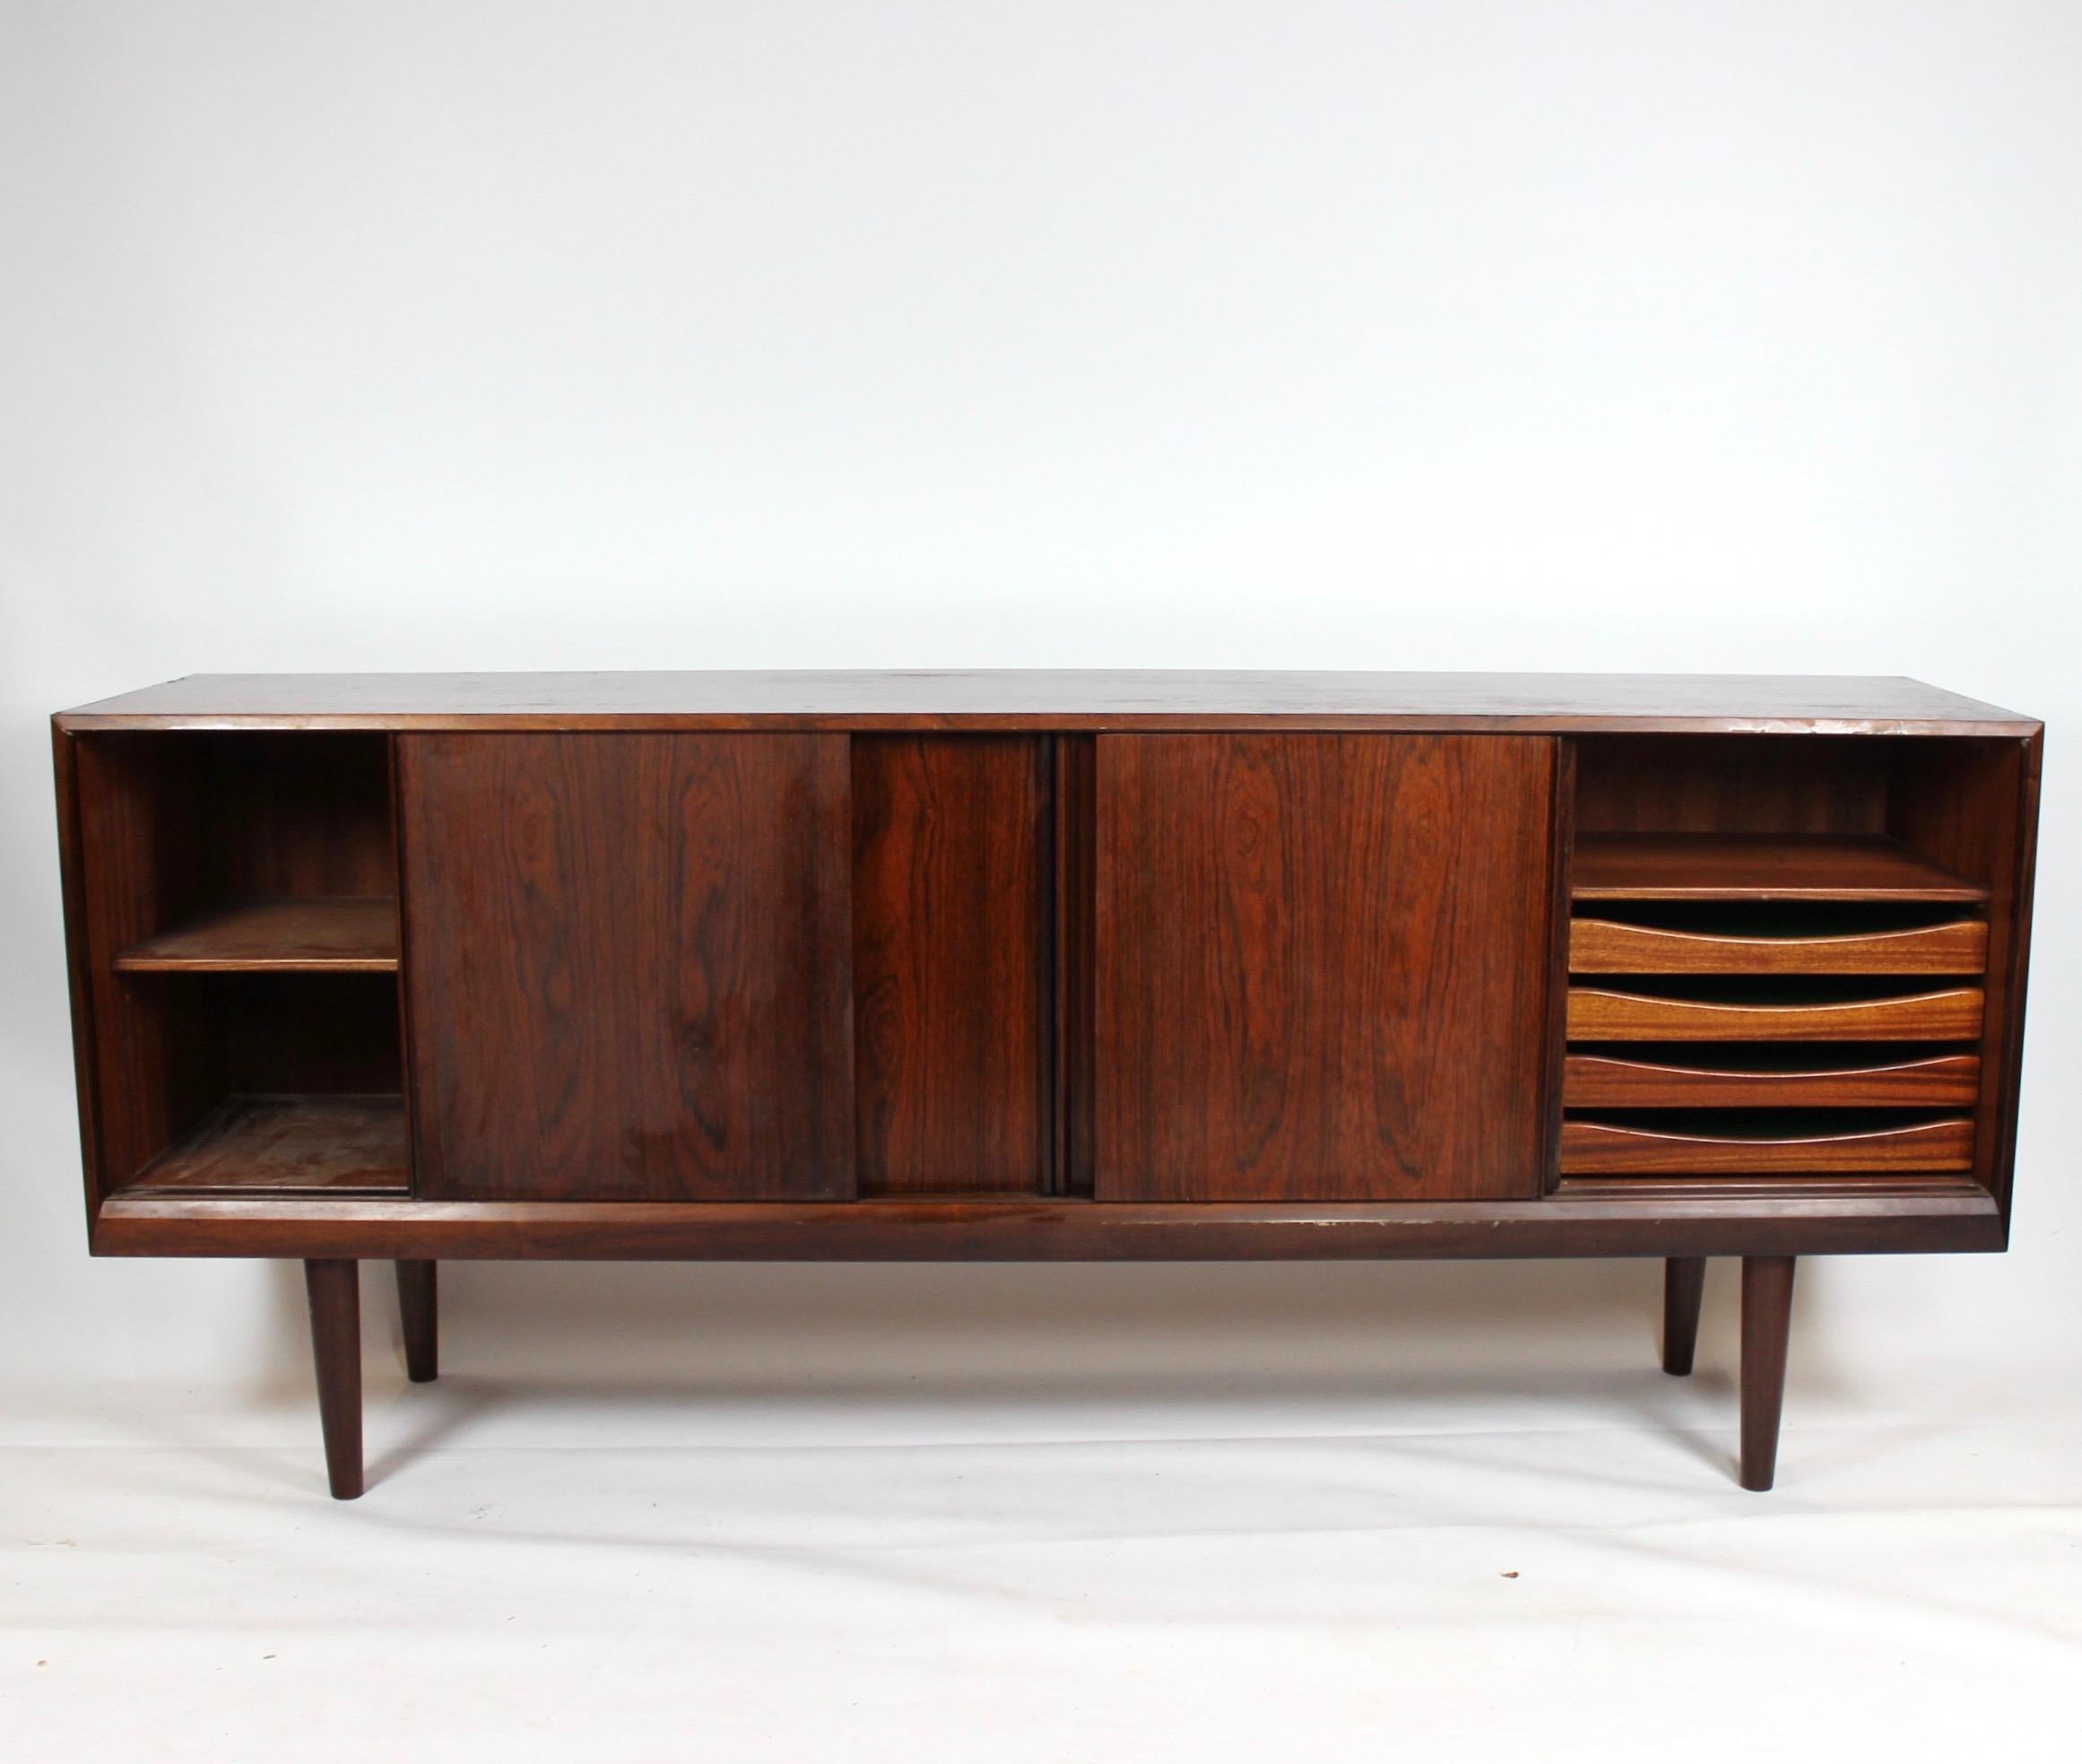 Sideboard in rosewood of Danish design from the 1960s and in great vintage condition.